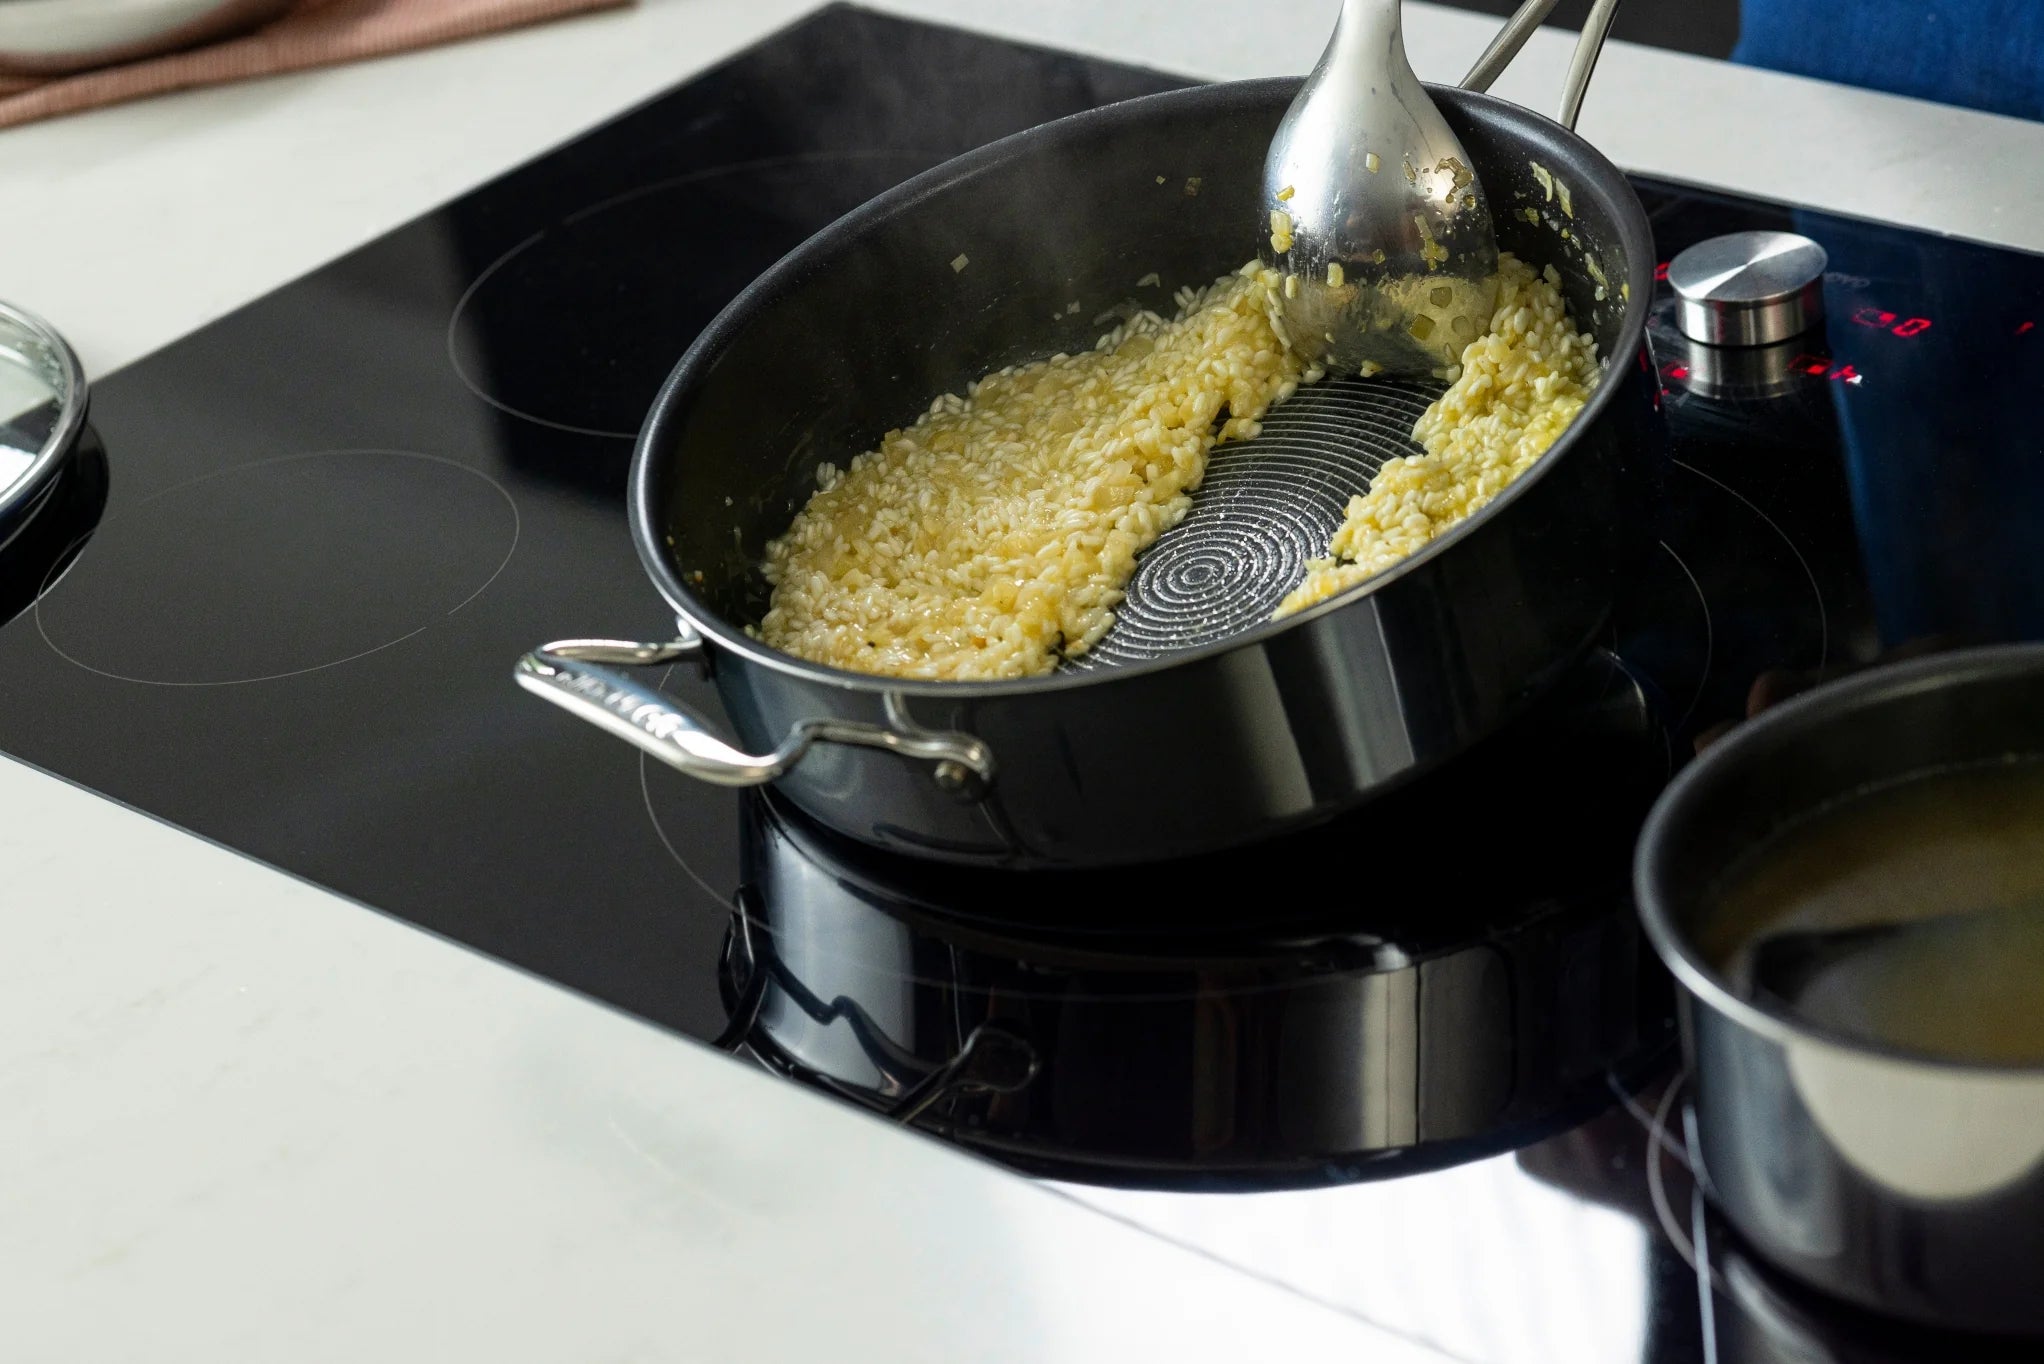 Risotto in a Circulon SteelShield Frying Pan